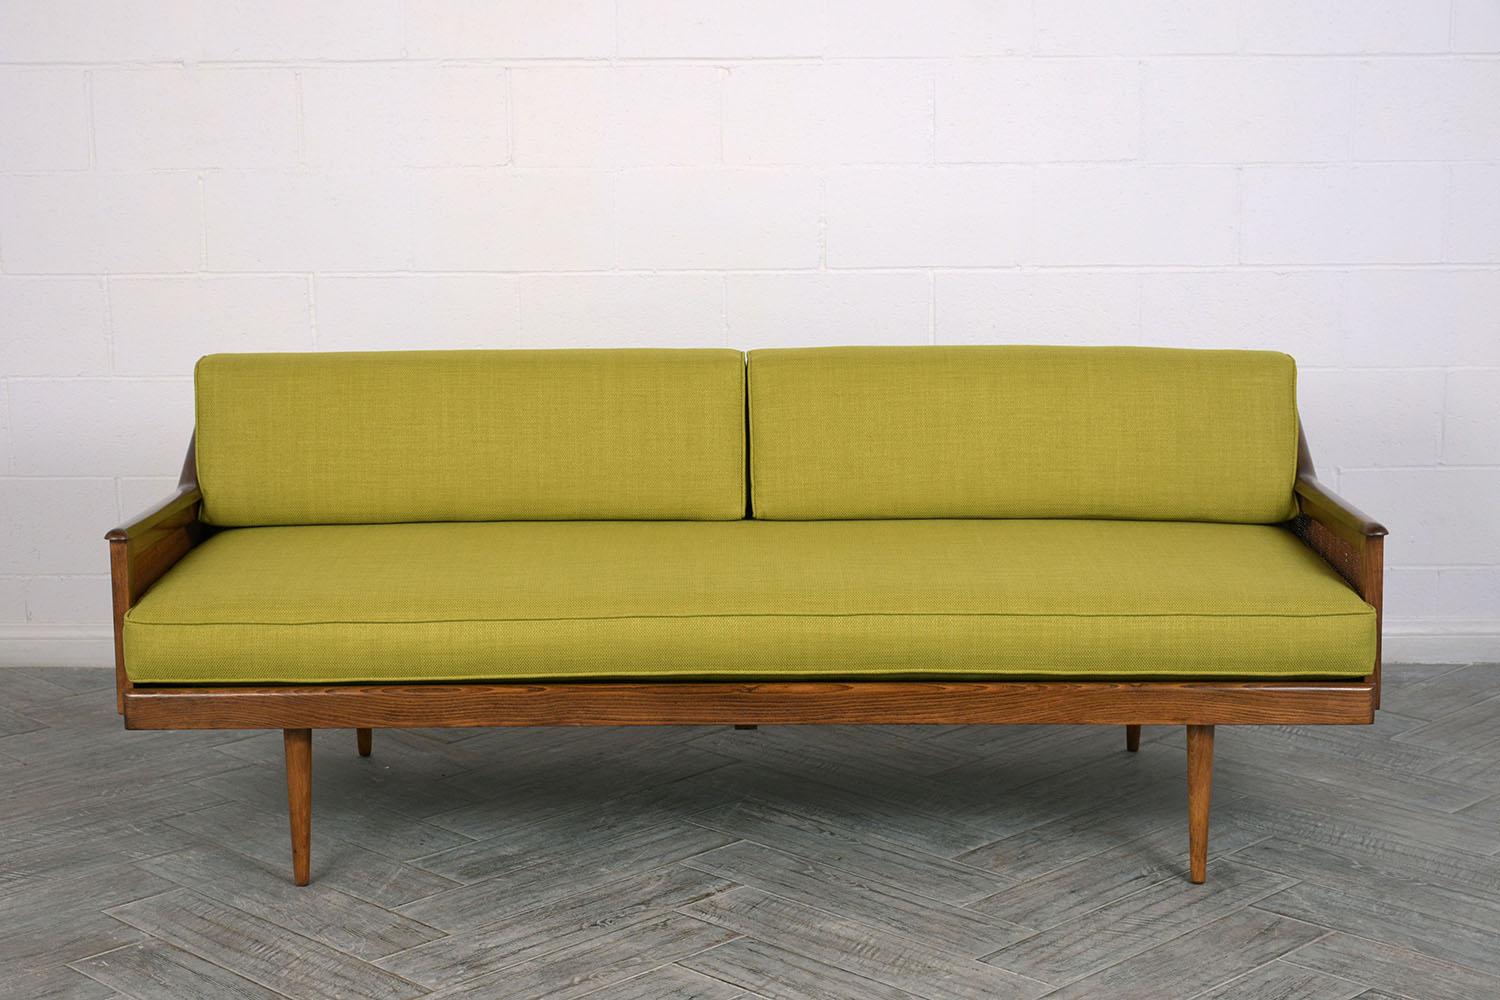 This 1960s Mid-Century Modern sofa has been completely restored. The wood frame has been refinished in a dark walnut color with a lacquered finish. The sides of the sofa have canning inserts and the back has cutout accents. The new foam cushions are